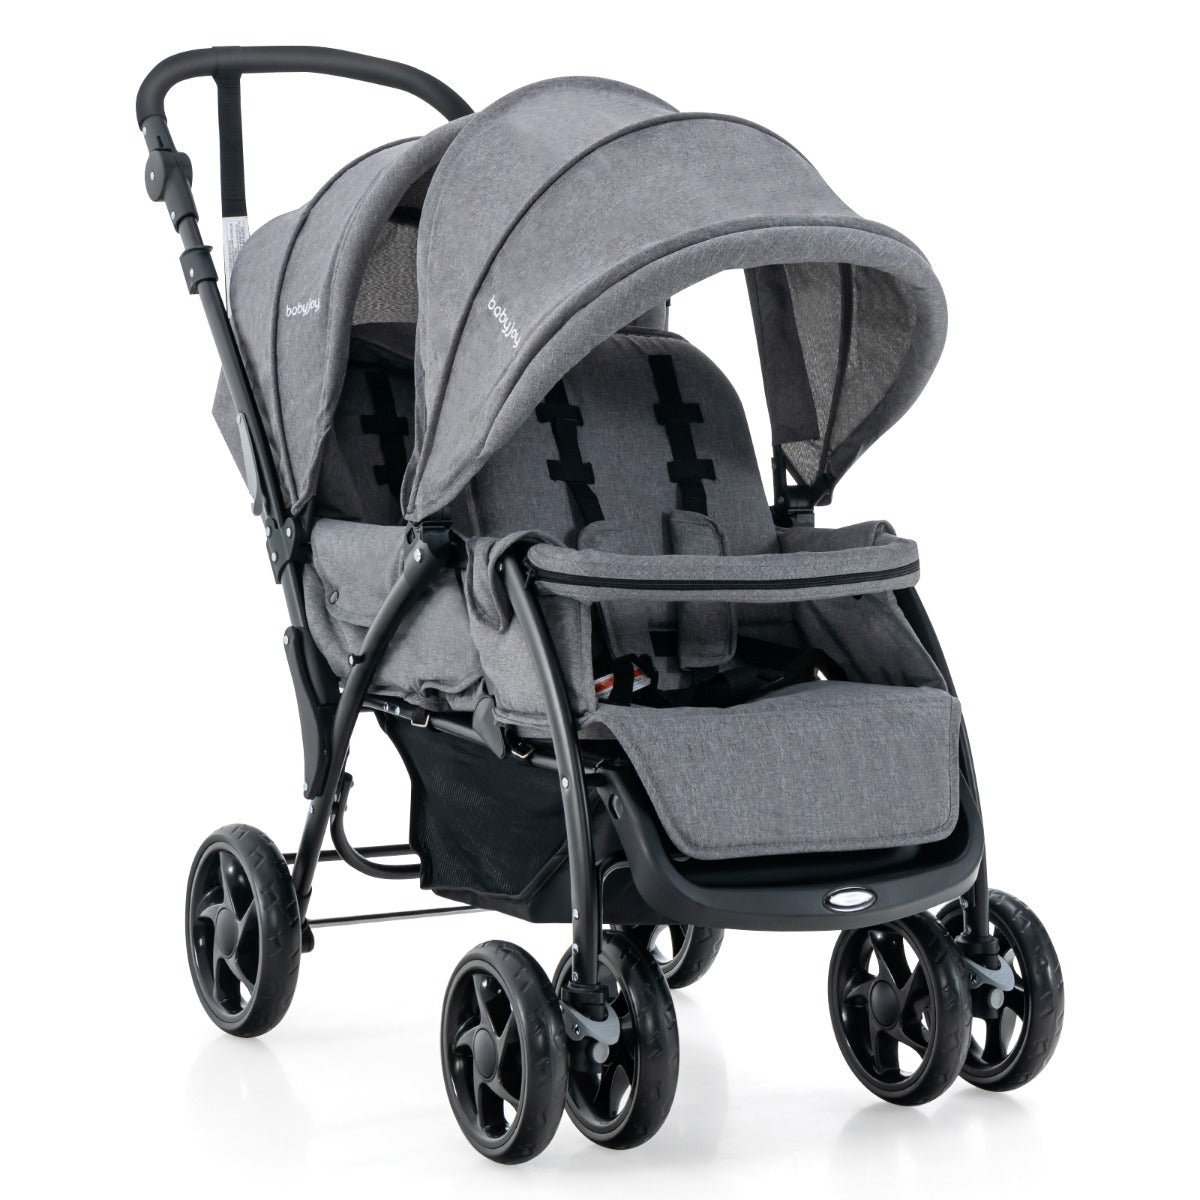 Grey Double Baby Stroller - Tandem Seating and Canopy